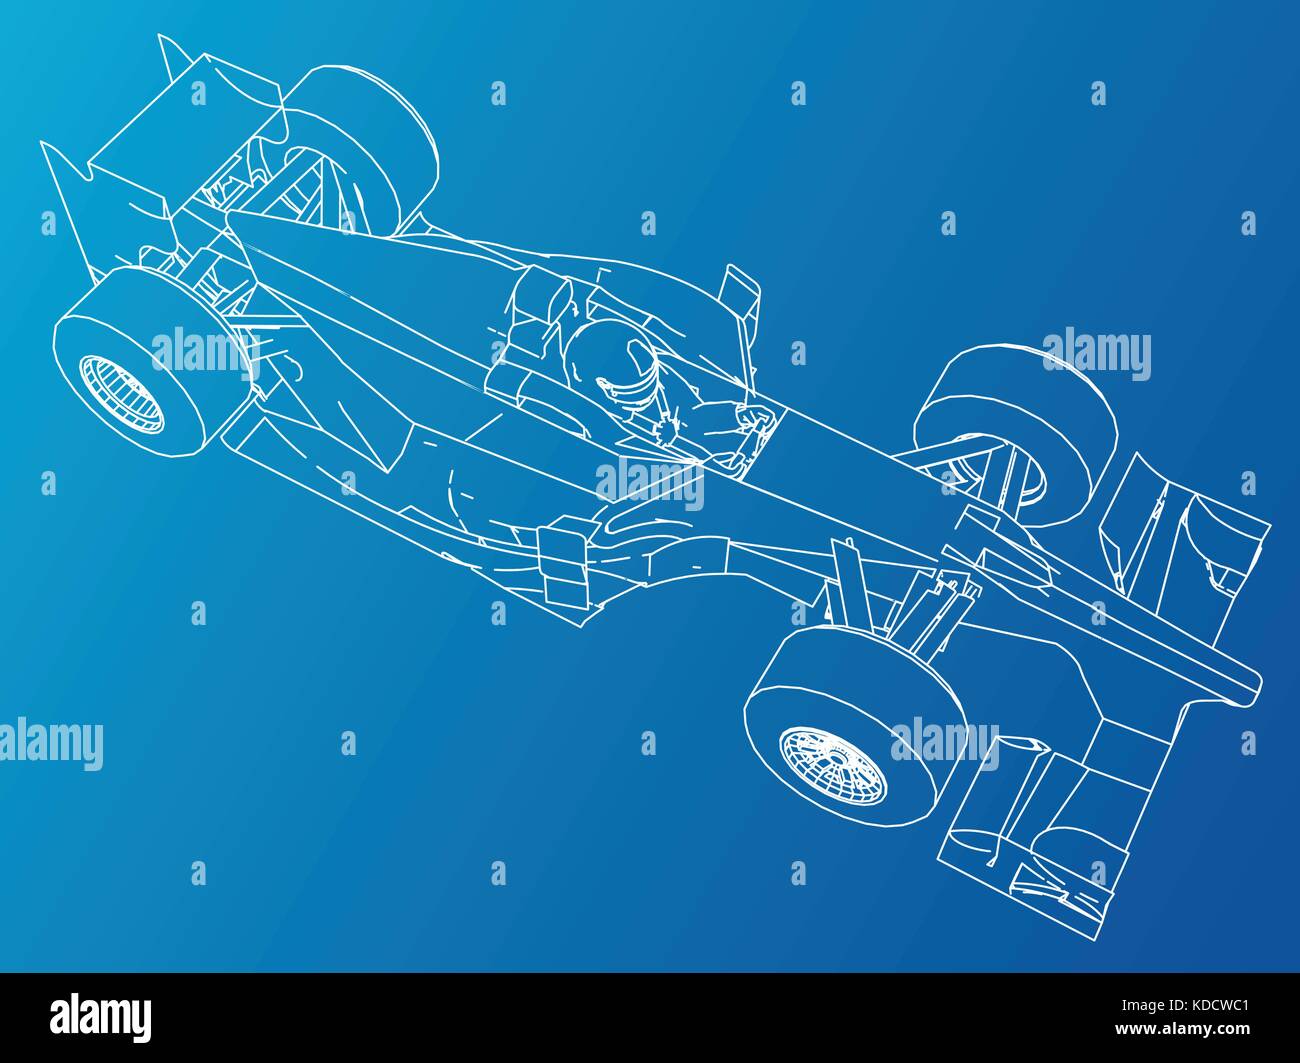 Formula race car. Abstract drawing. Tracing illustration of 3d Stock Vector